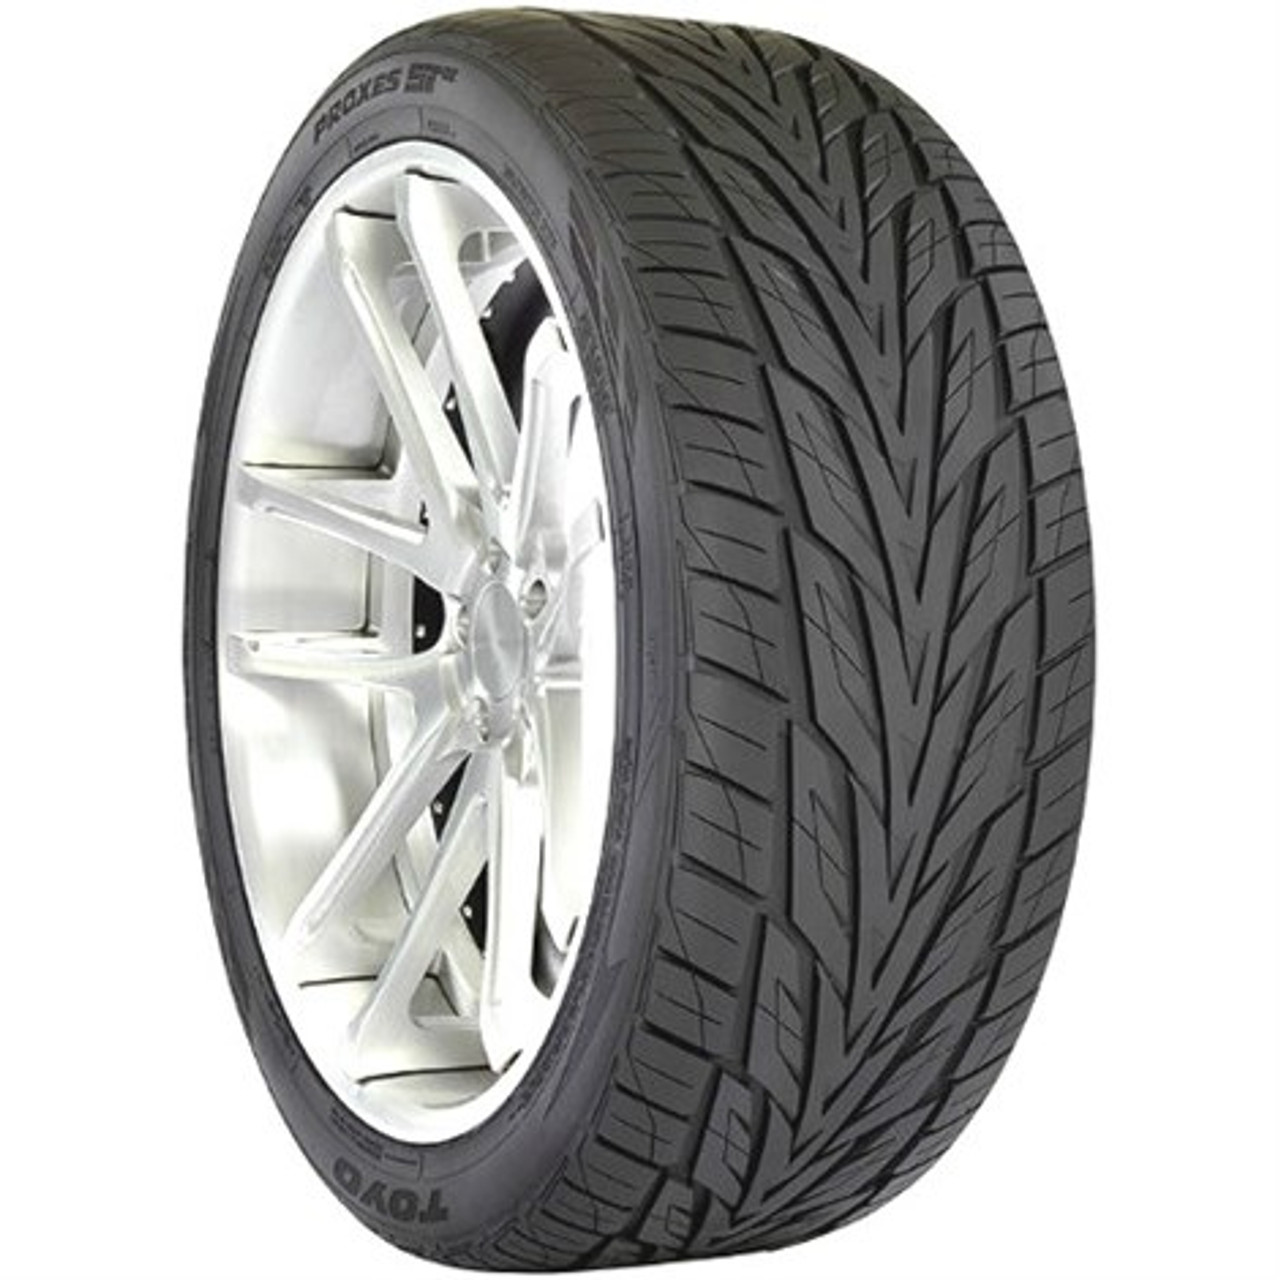 Toyo Proxes ST III Tire - 245/60R18